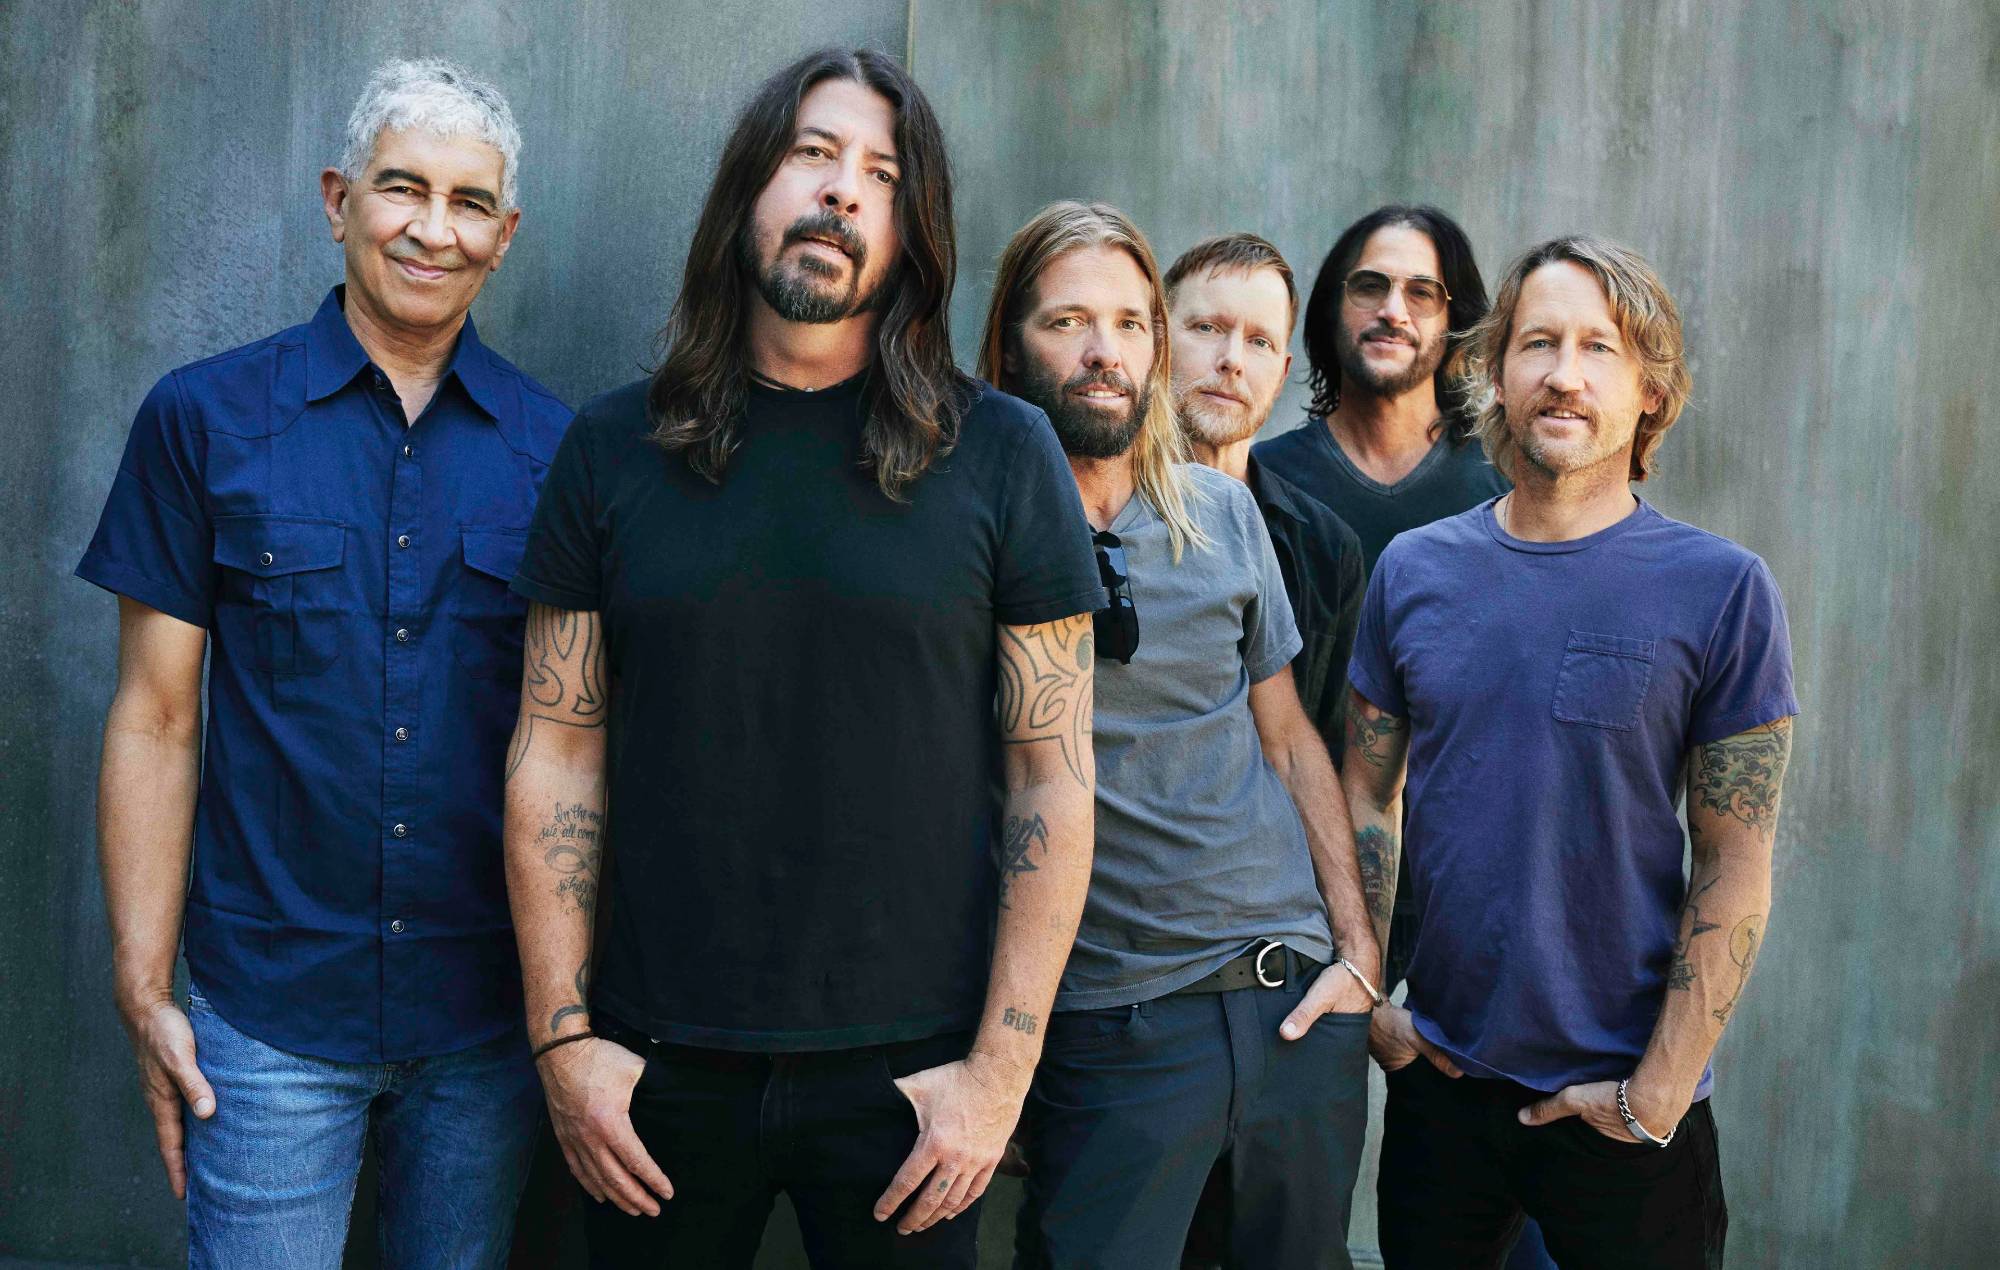 Foo Fighters announce 2022 UK stadium run: “We’re playing like every show could be the last”